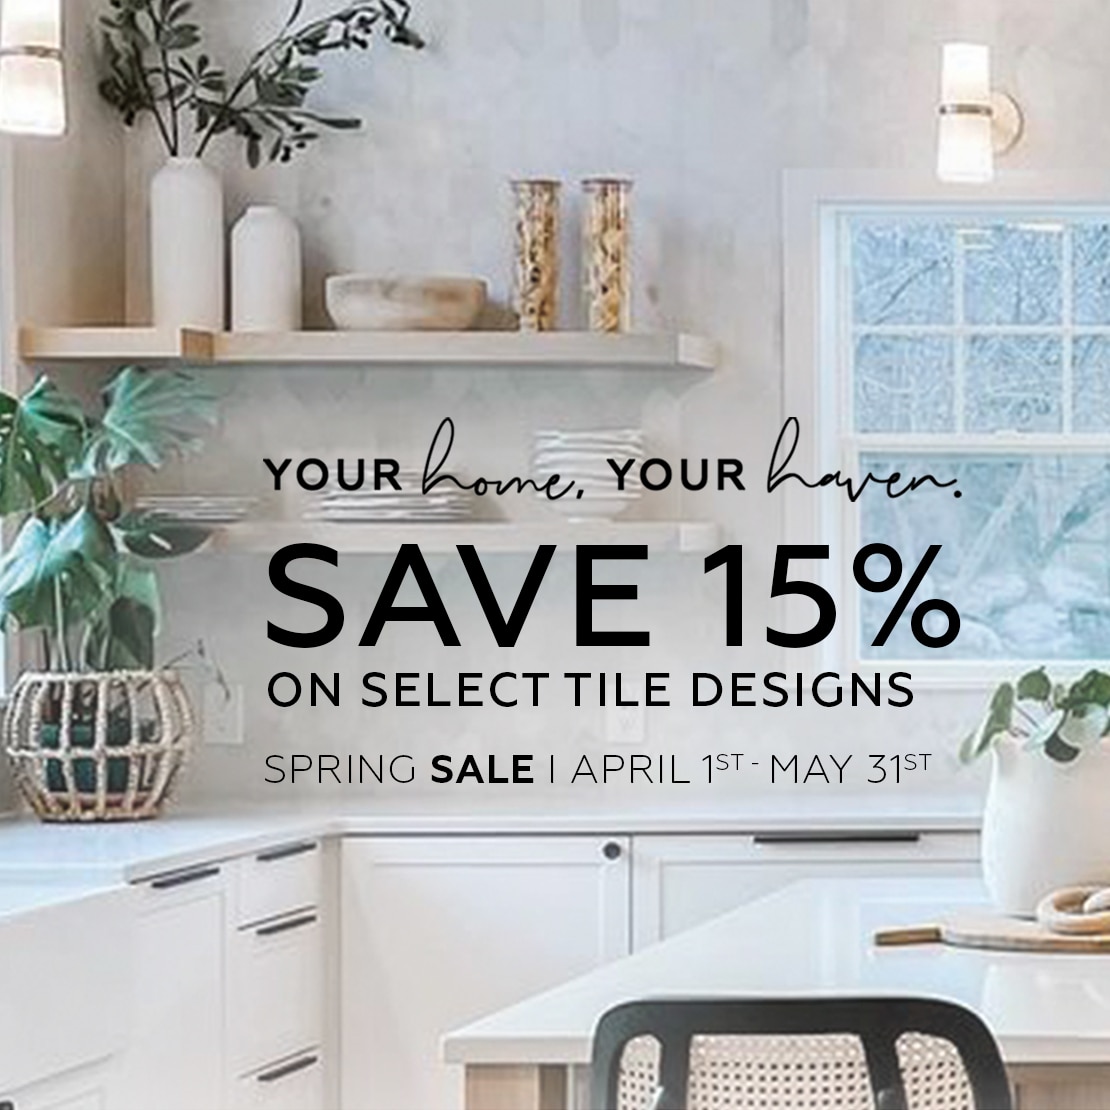 Your home. Your haven. Save 15% on select tile designs. Spring Sale | April 1st - May 31st